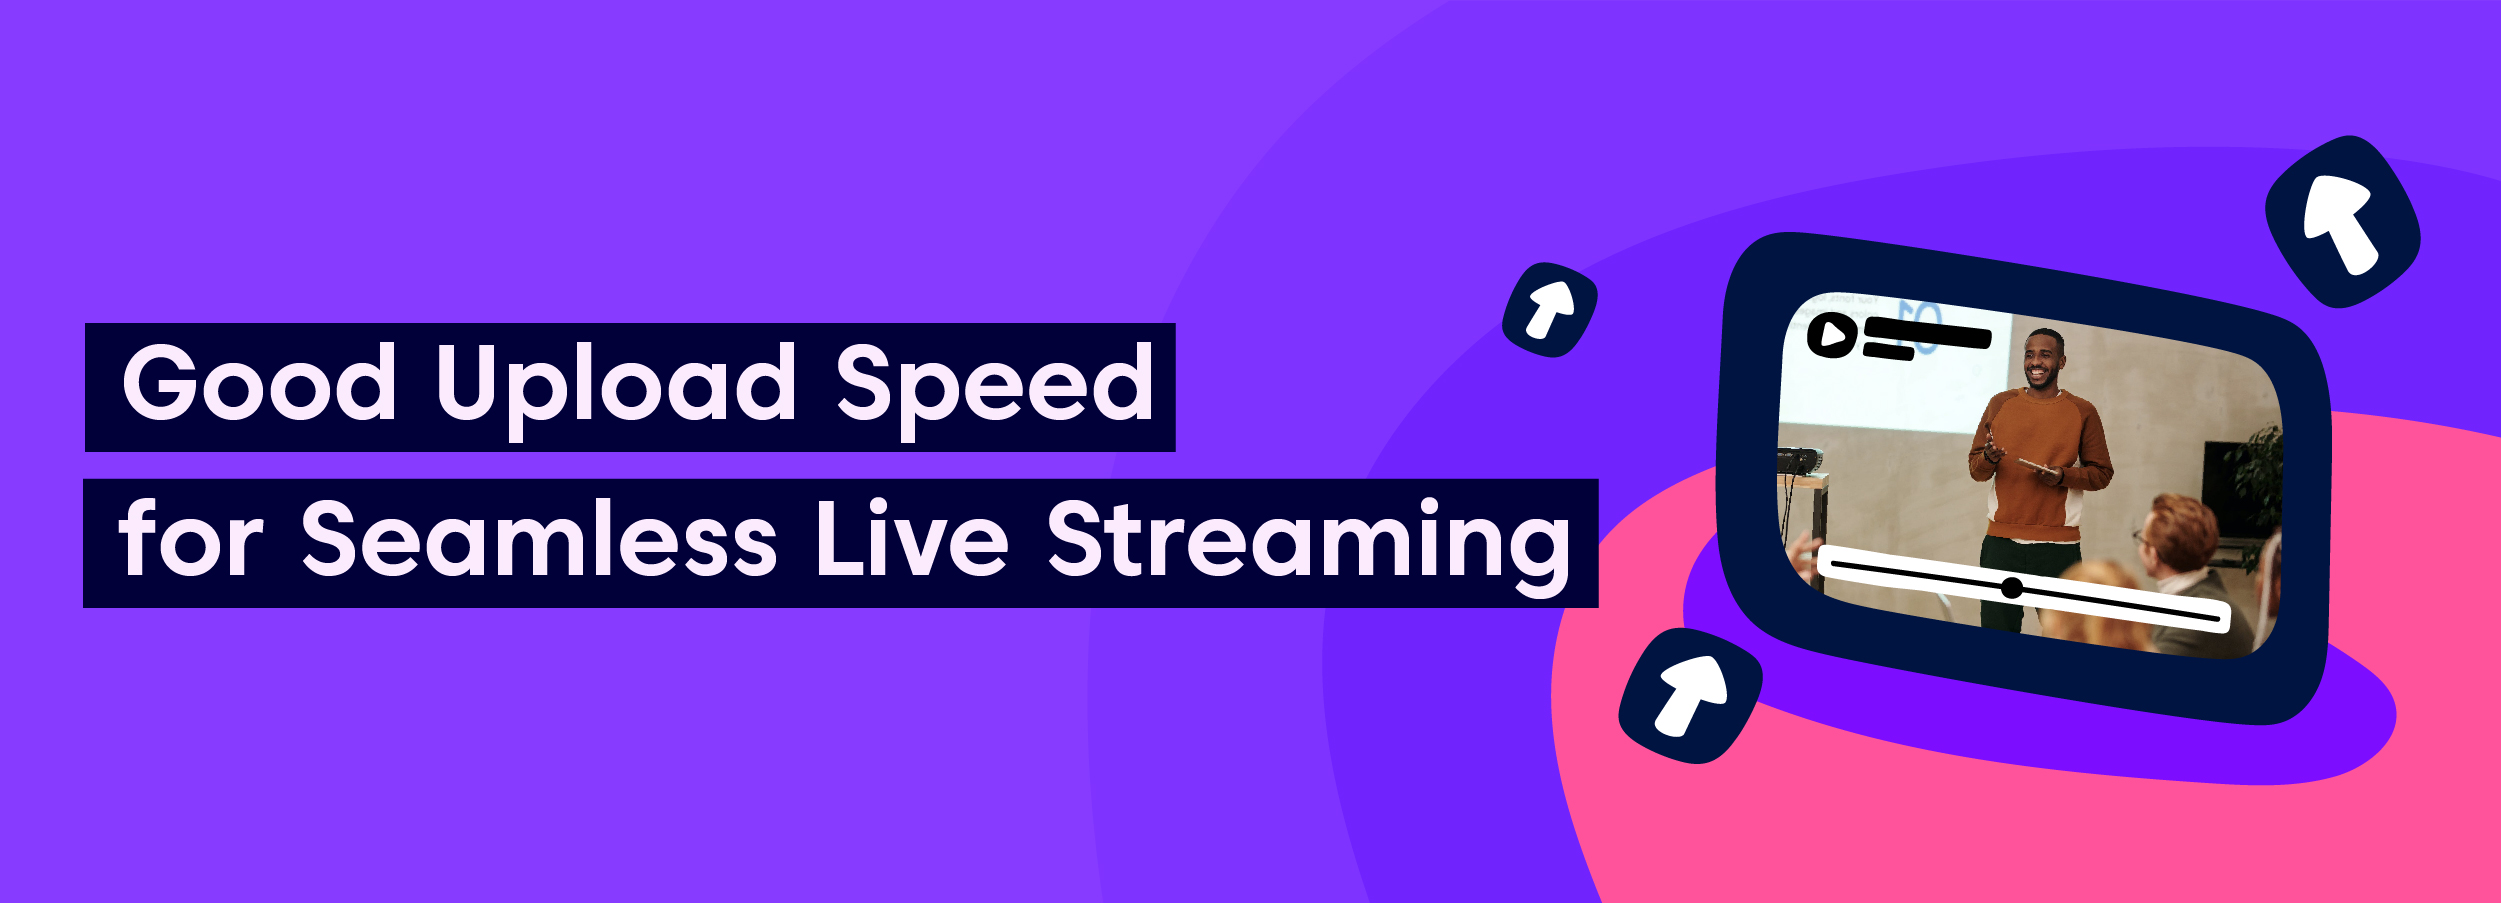 What Is a Good Upload Speed for Seamless Live Streaming?